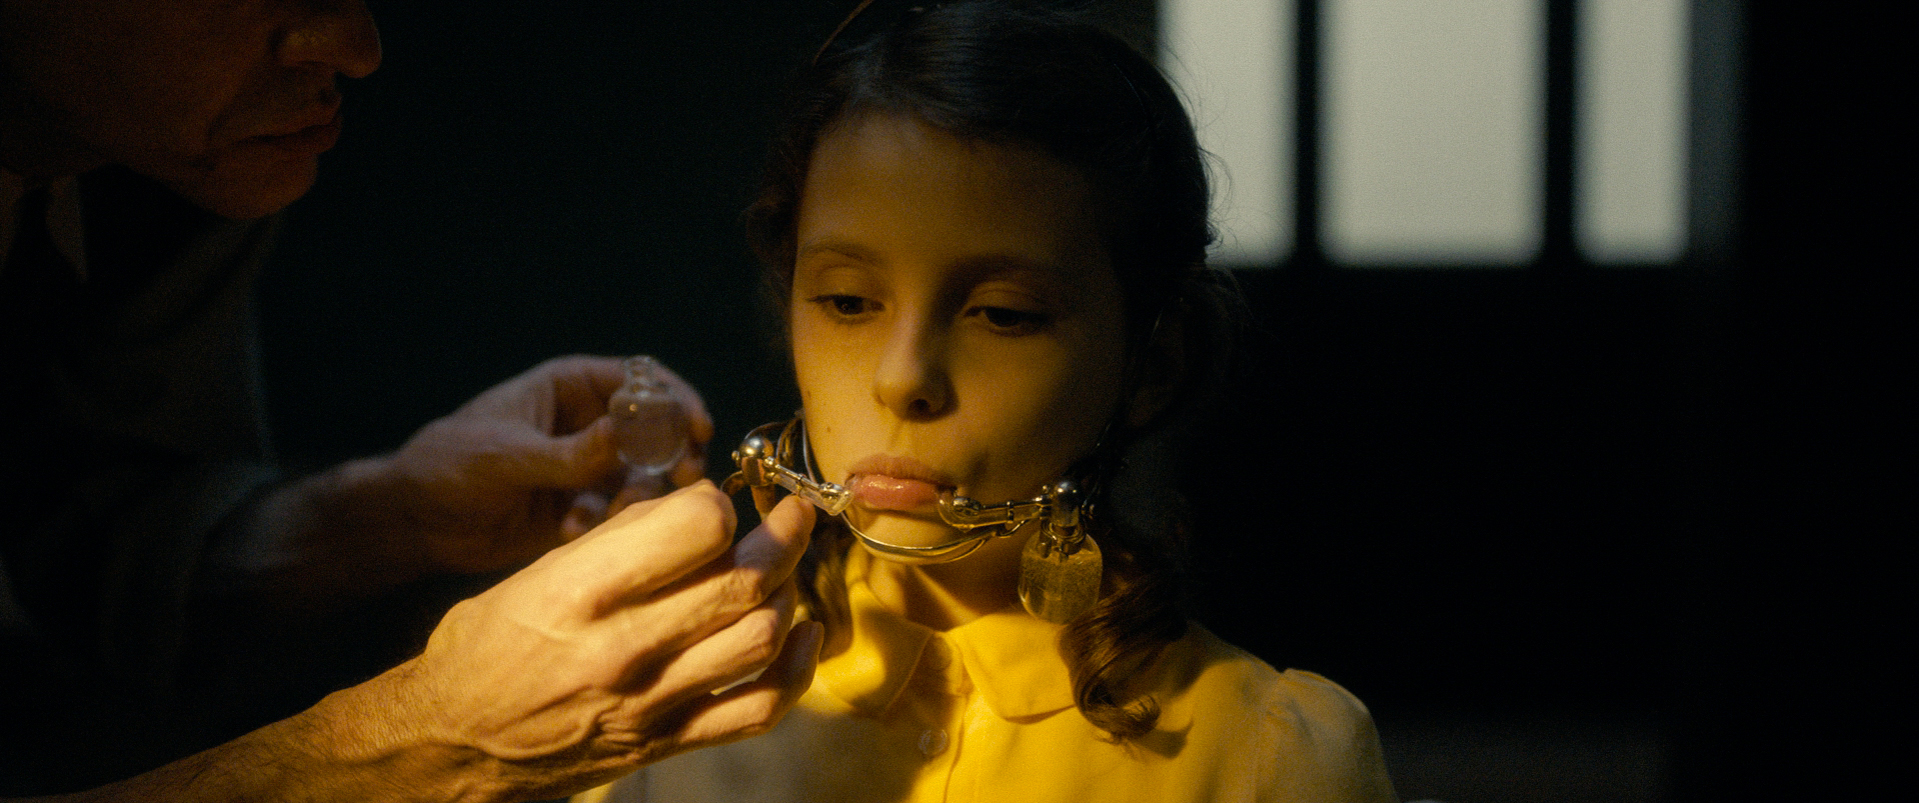 A little girl in a white dress sits in a dim room as an older man fixes a dental contraption onto her face.